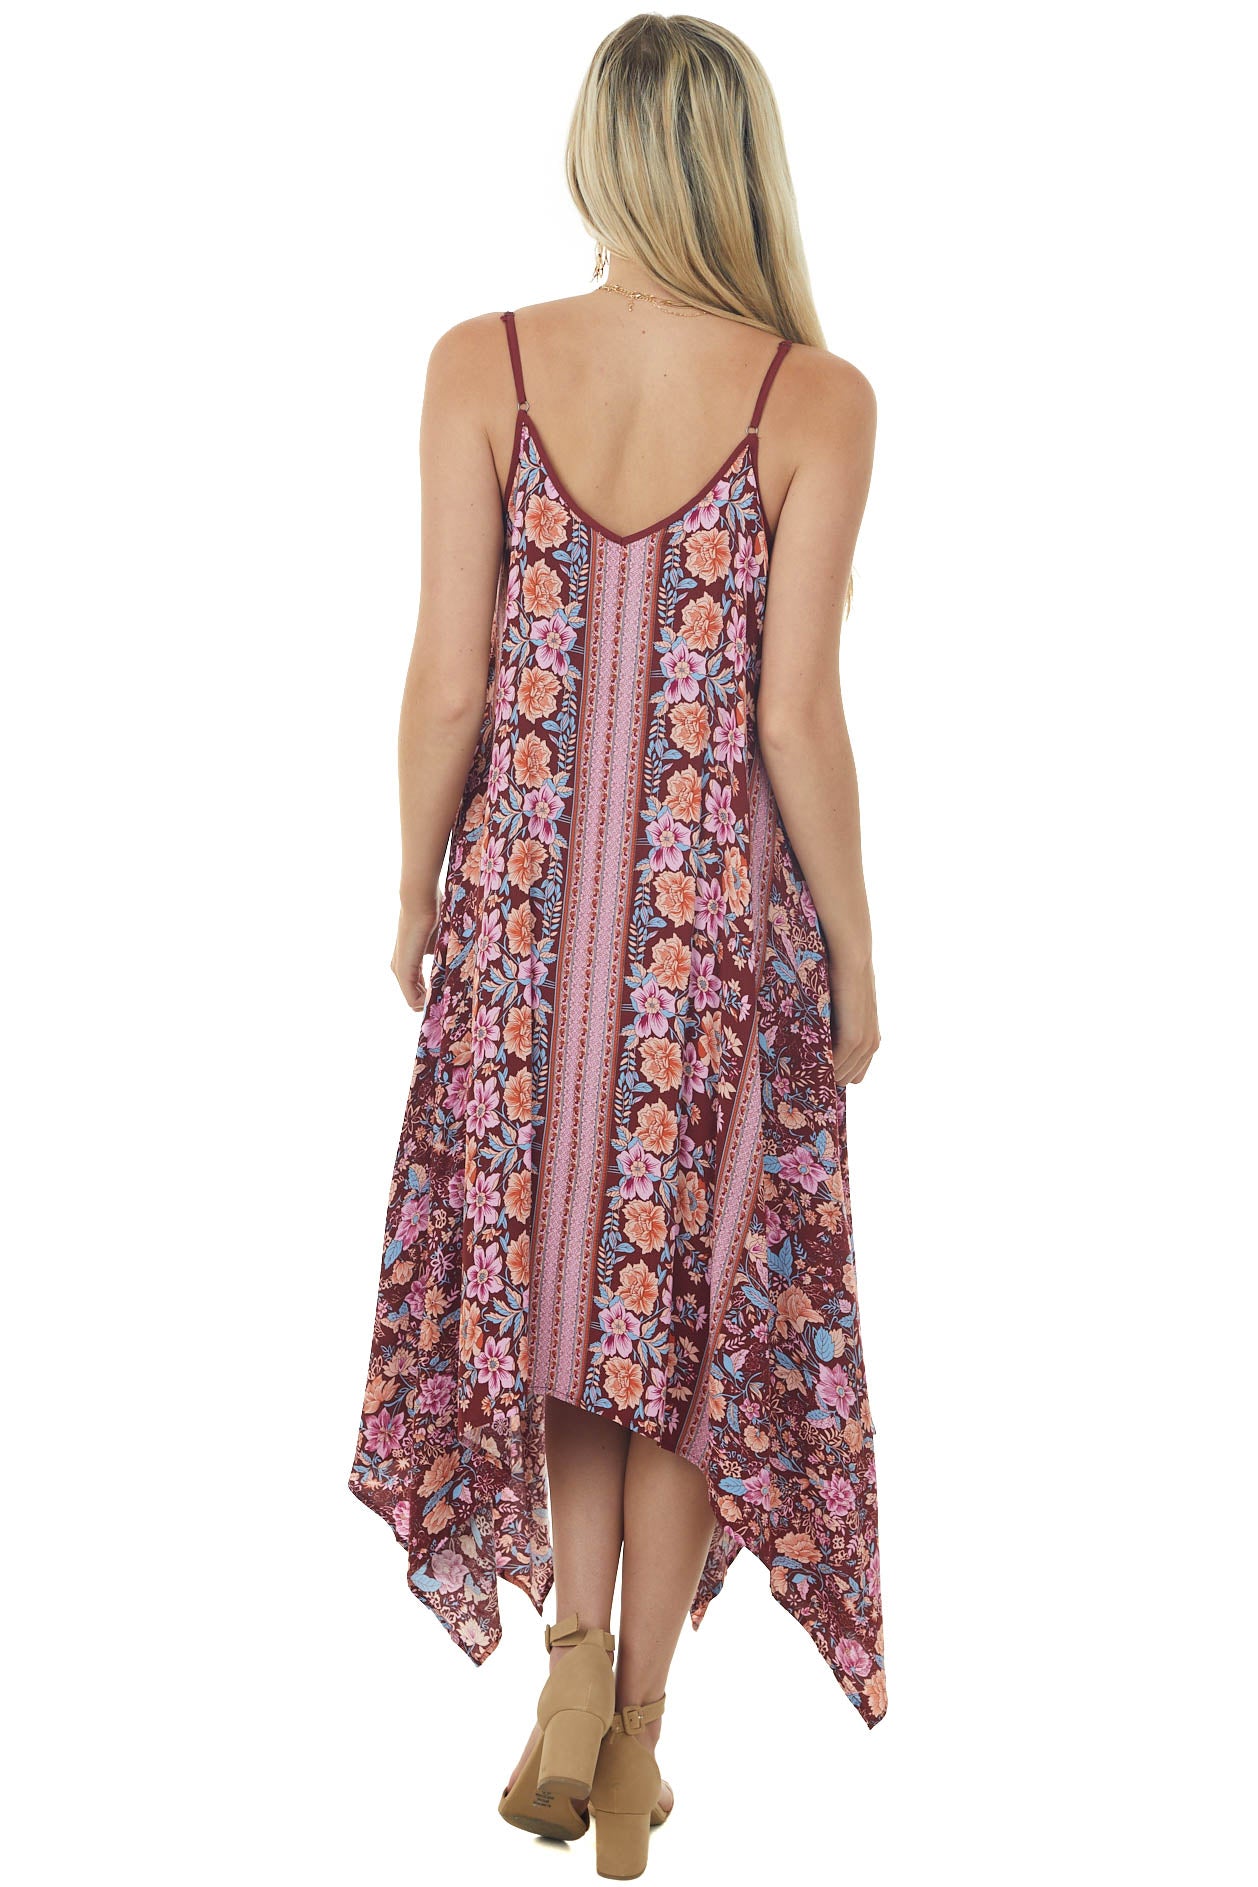 Sangria Floral and Abstract Sleeveless Dress